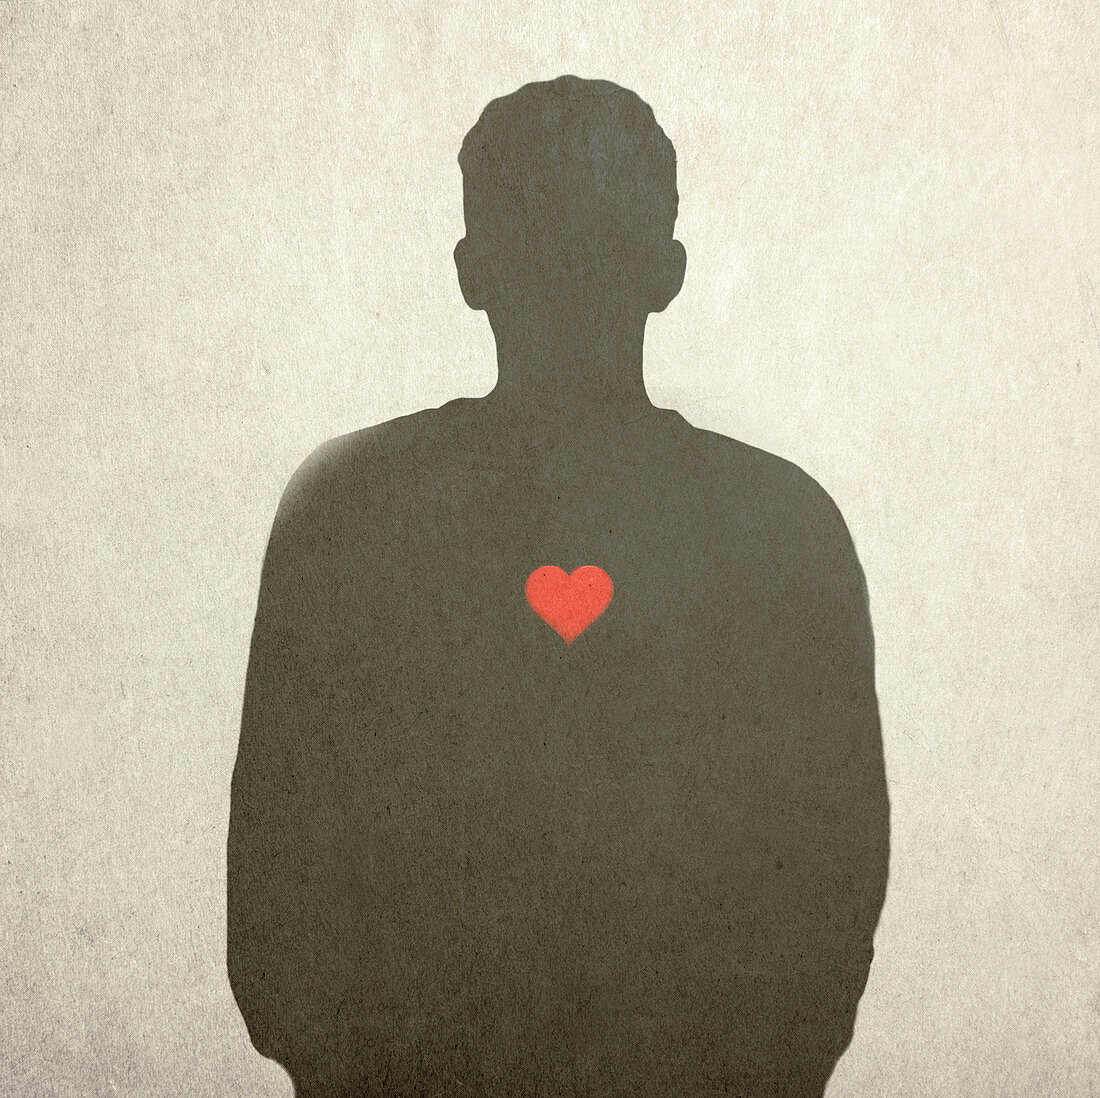 Red heart on silhouette of man, illustration